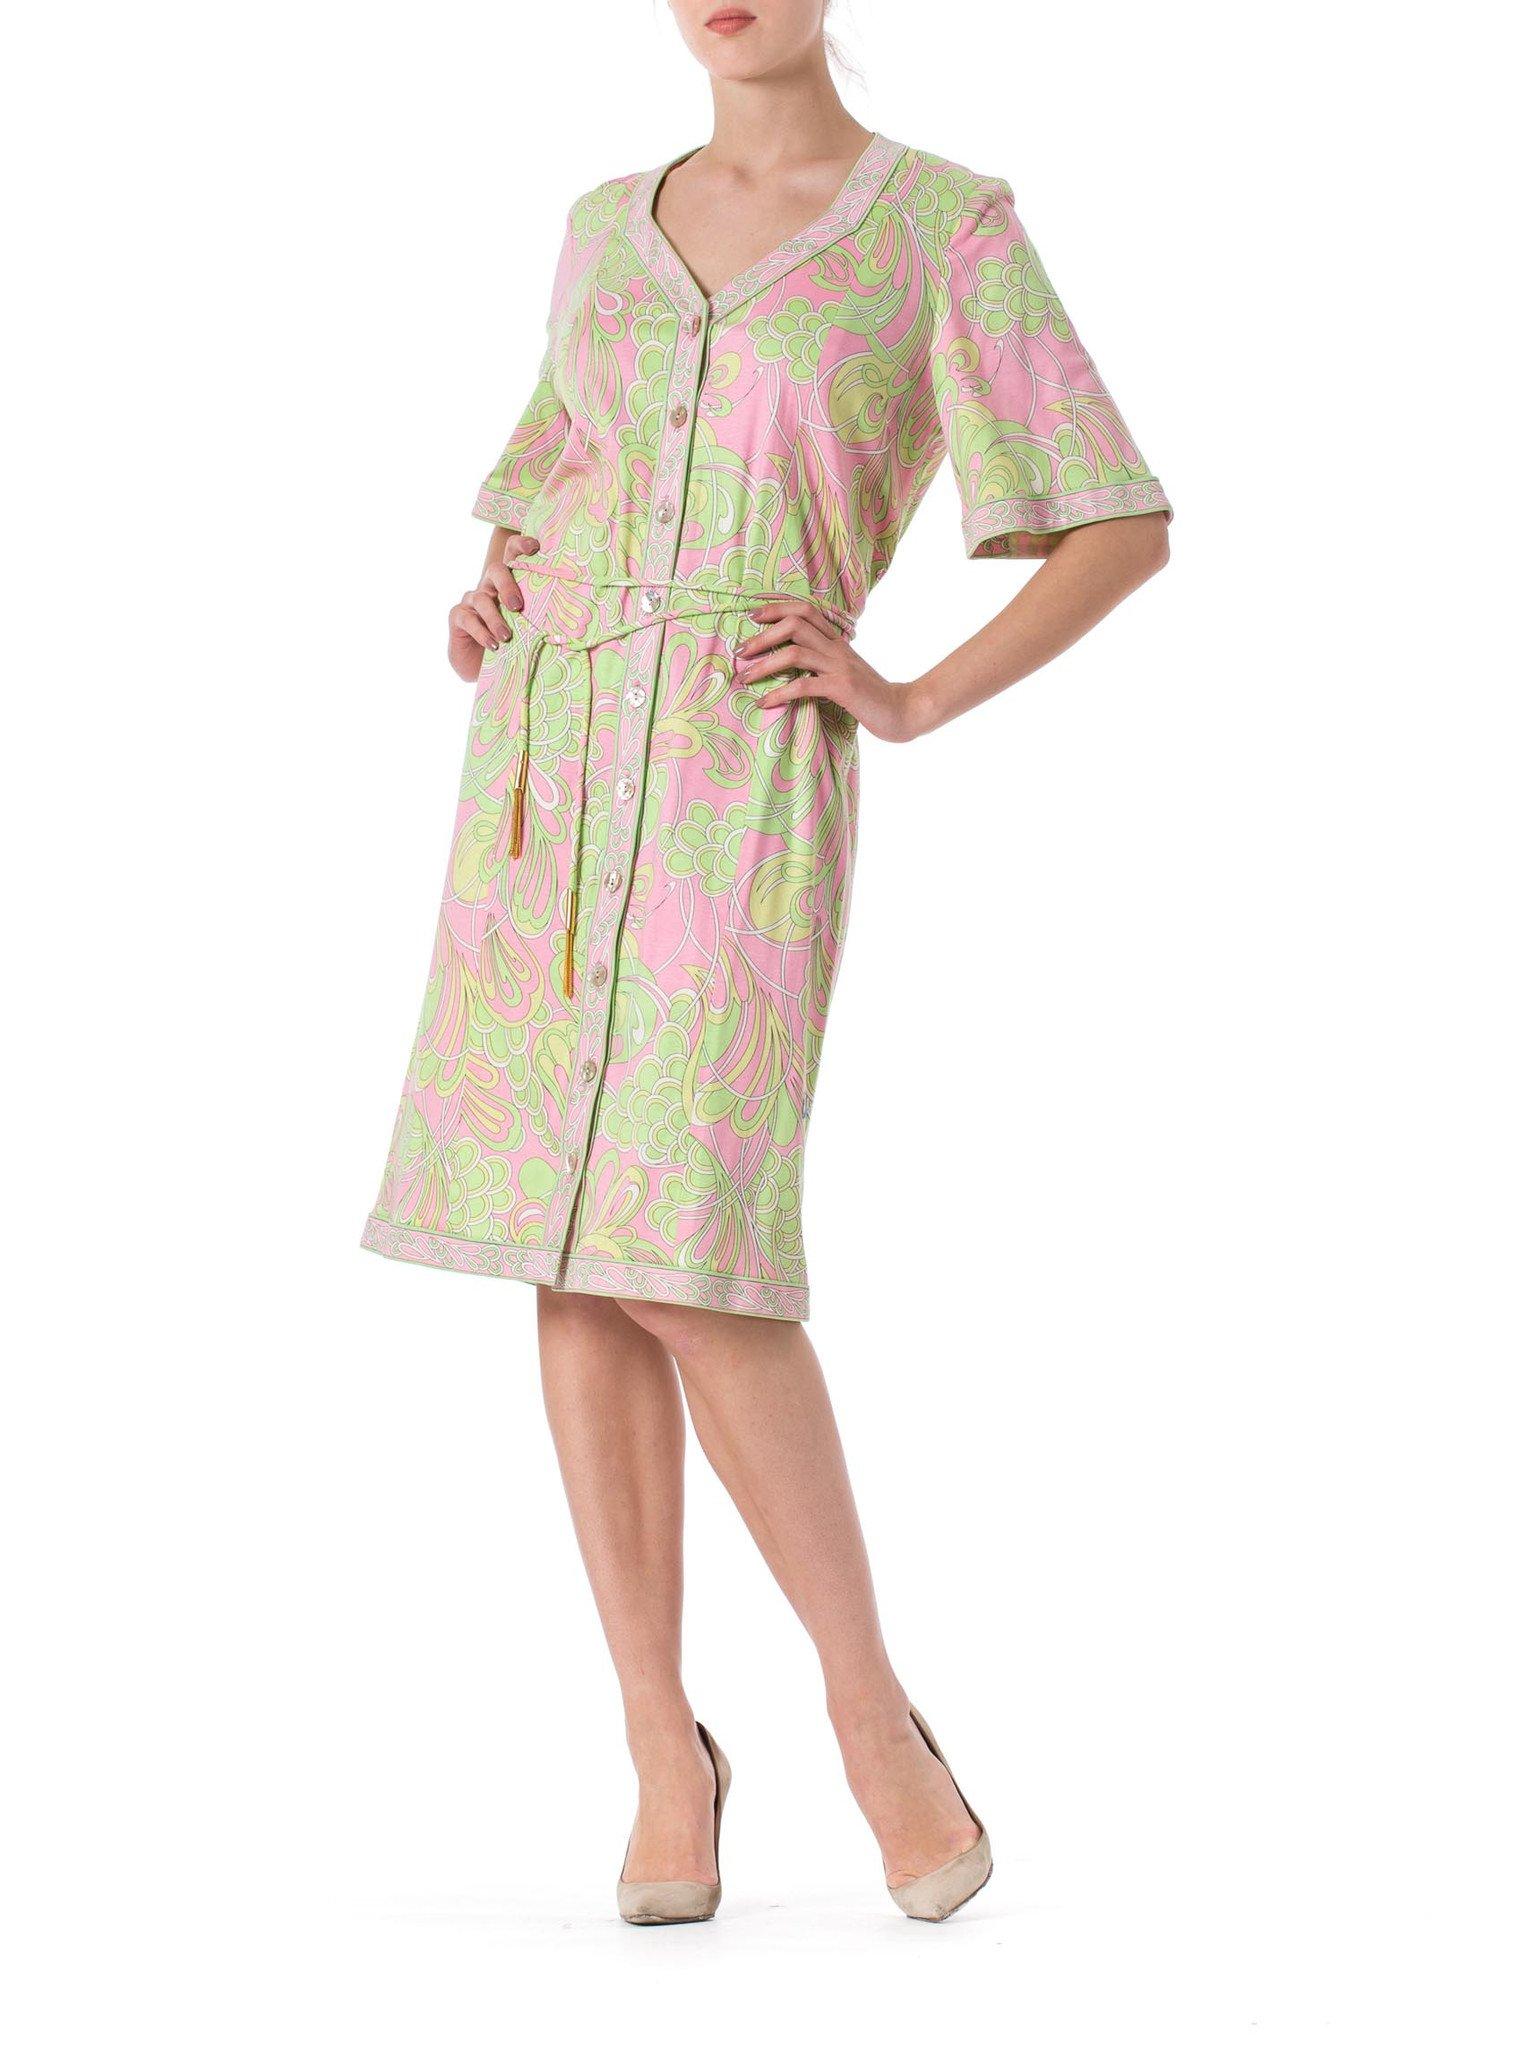 1960S AVERADO BESSI Baby Pink & Green Cotton Jersey Mod Abstract Psychedelic Print House Dress